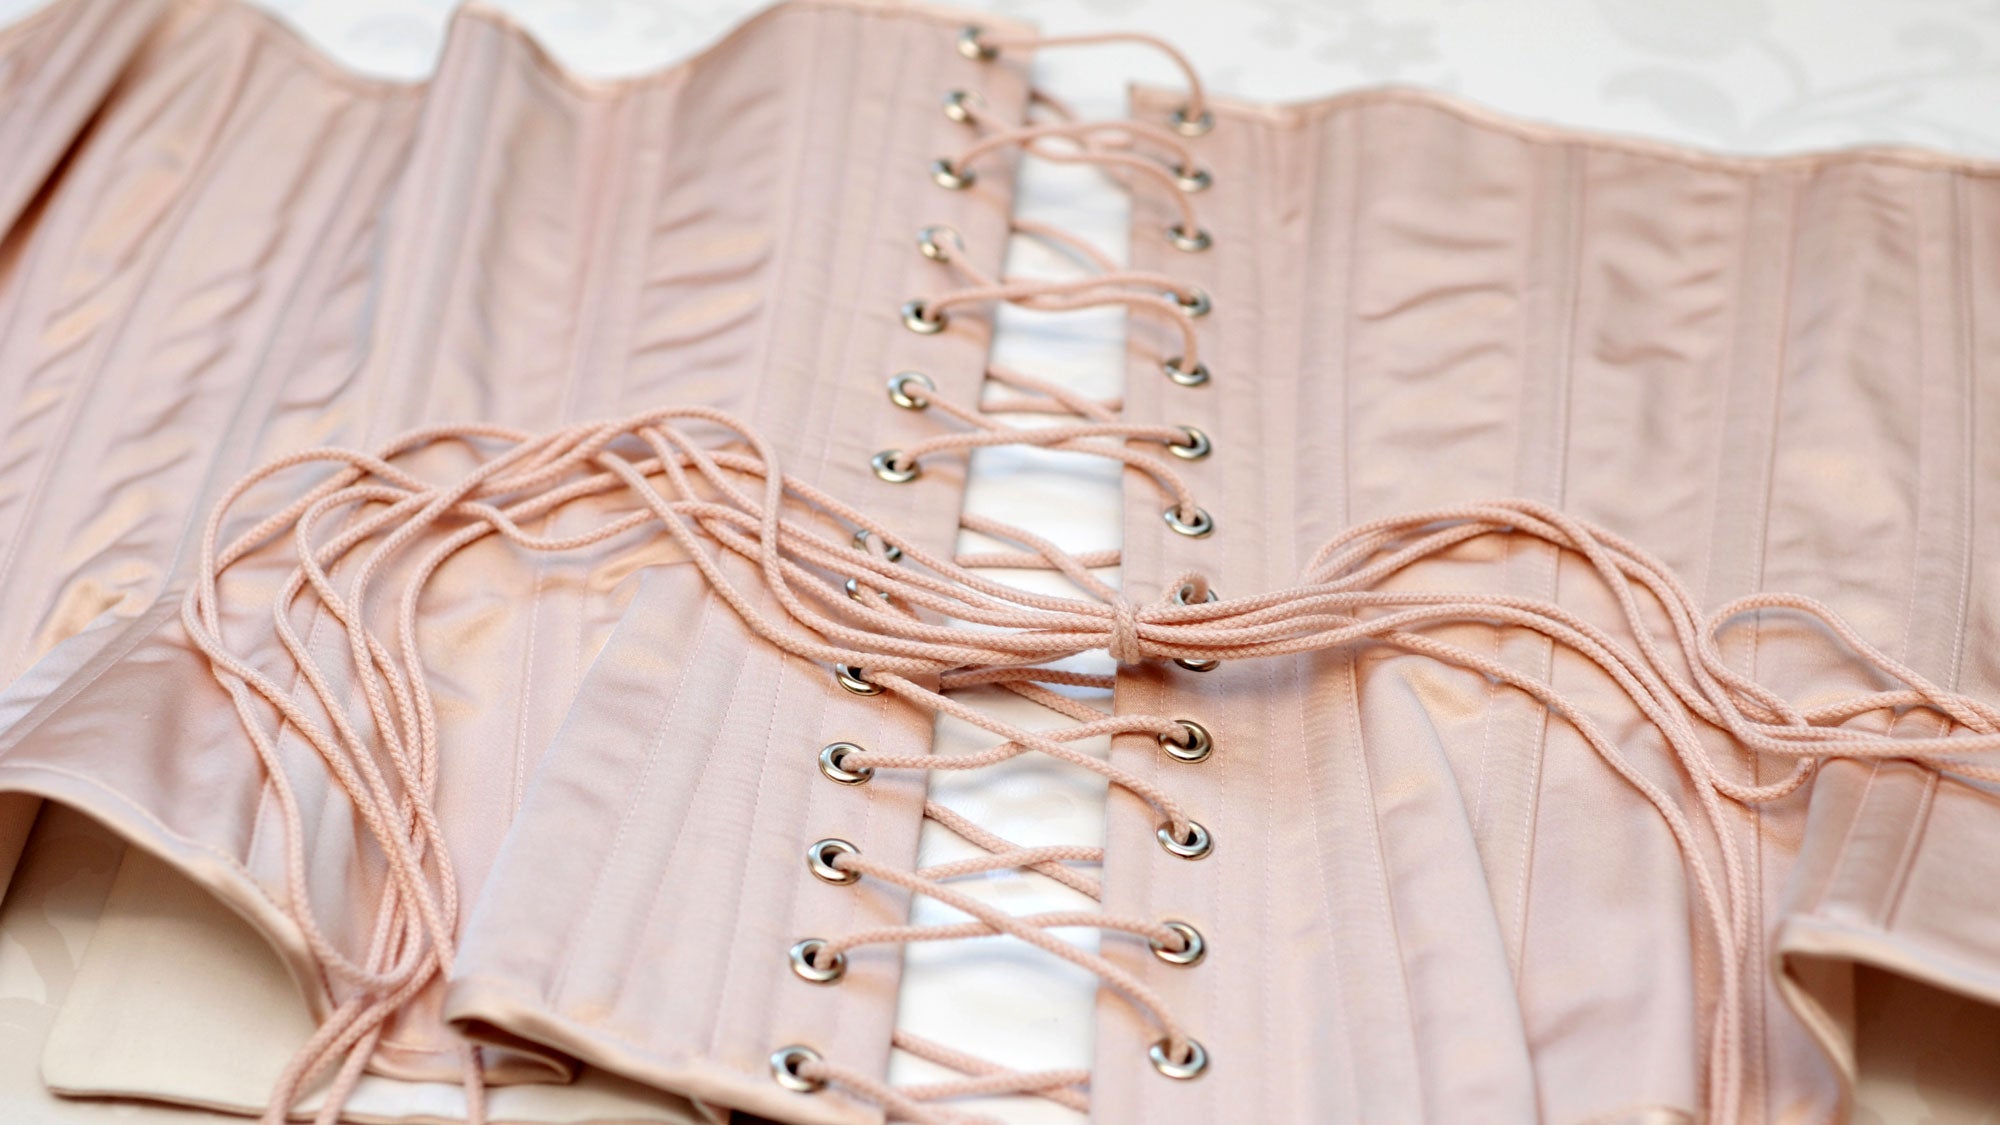 How to Buy a Corset: Tips for Buying Your First Corset